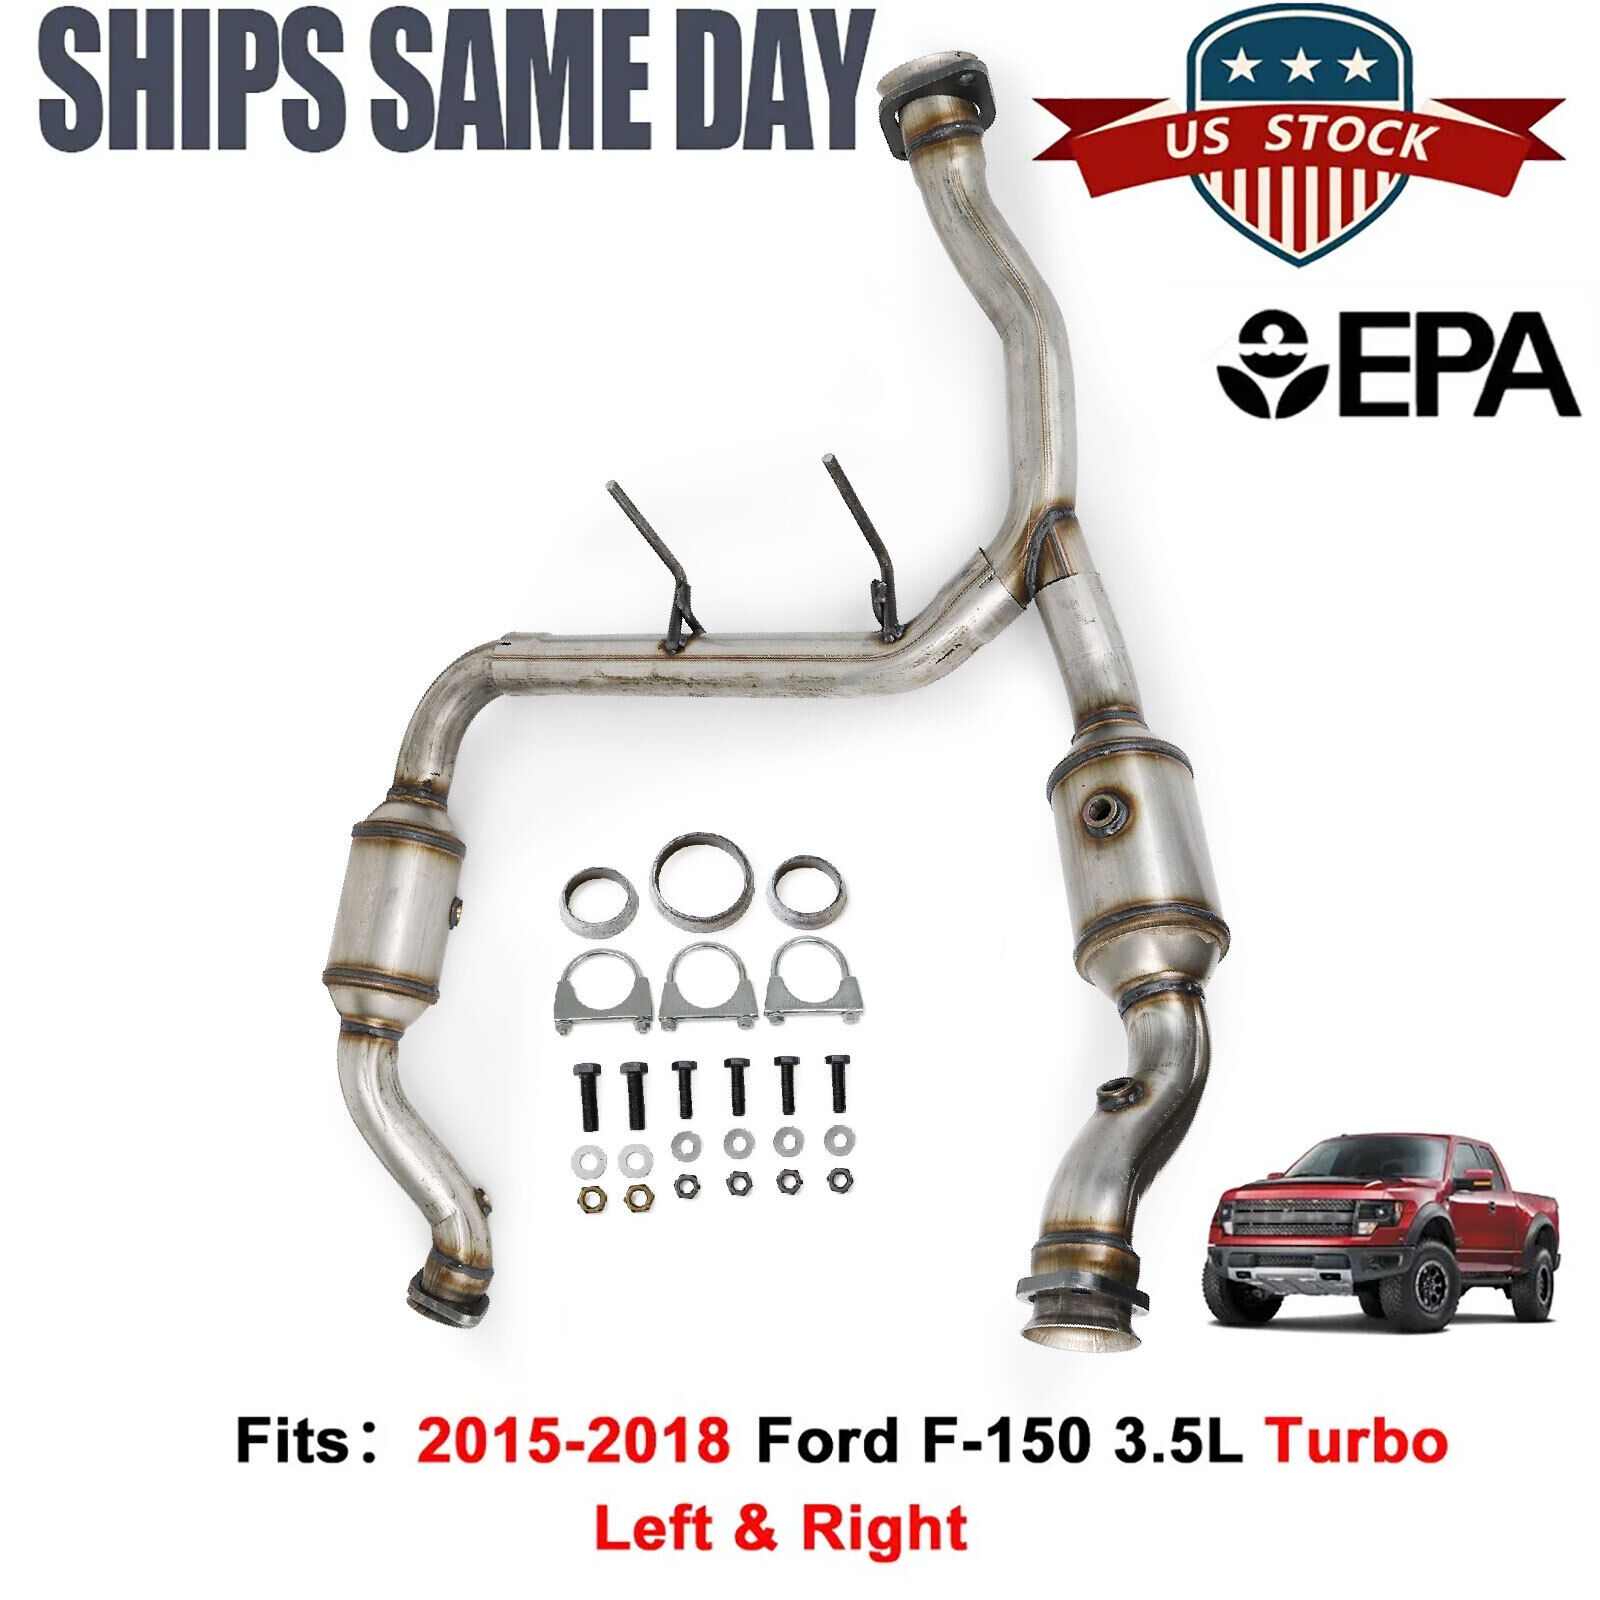 Direct Fit Catalytic Converter For Ford F-150 3.5L Turbo 2015-2018 Left & Right